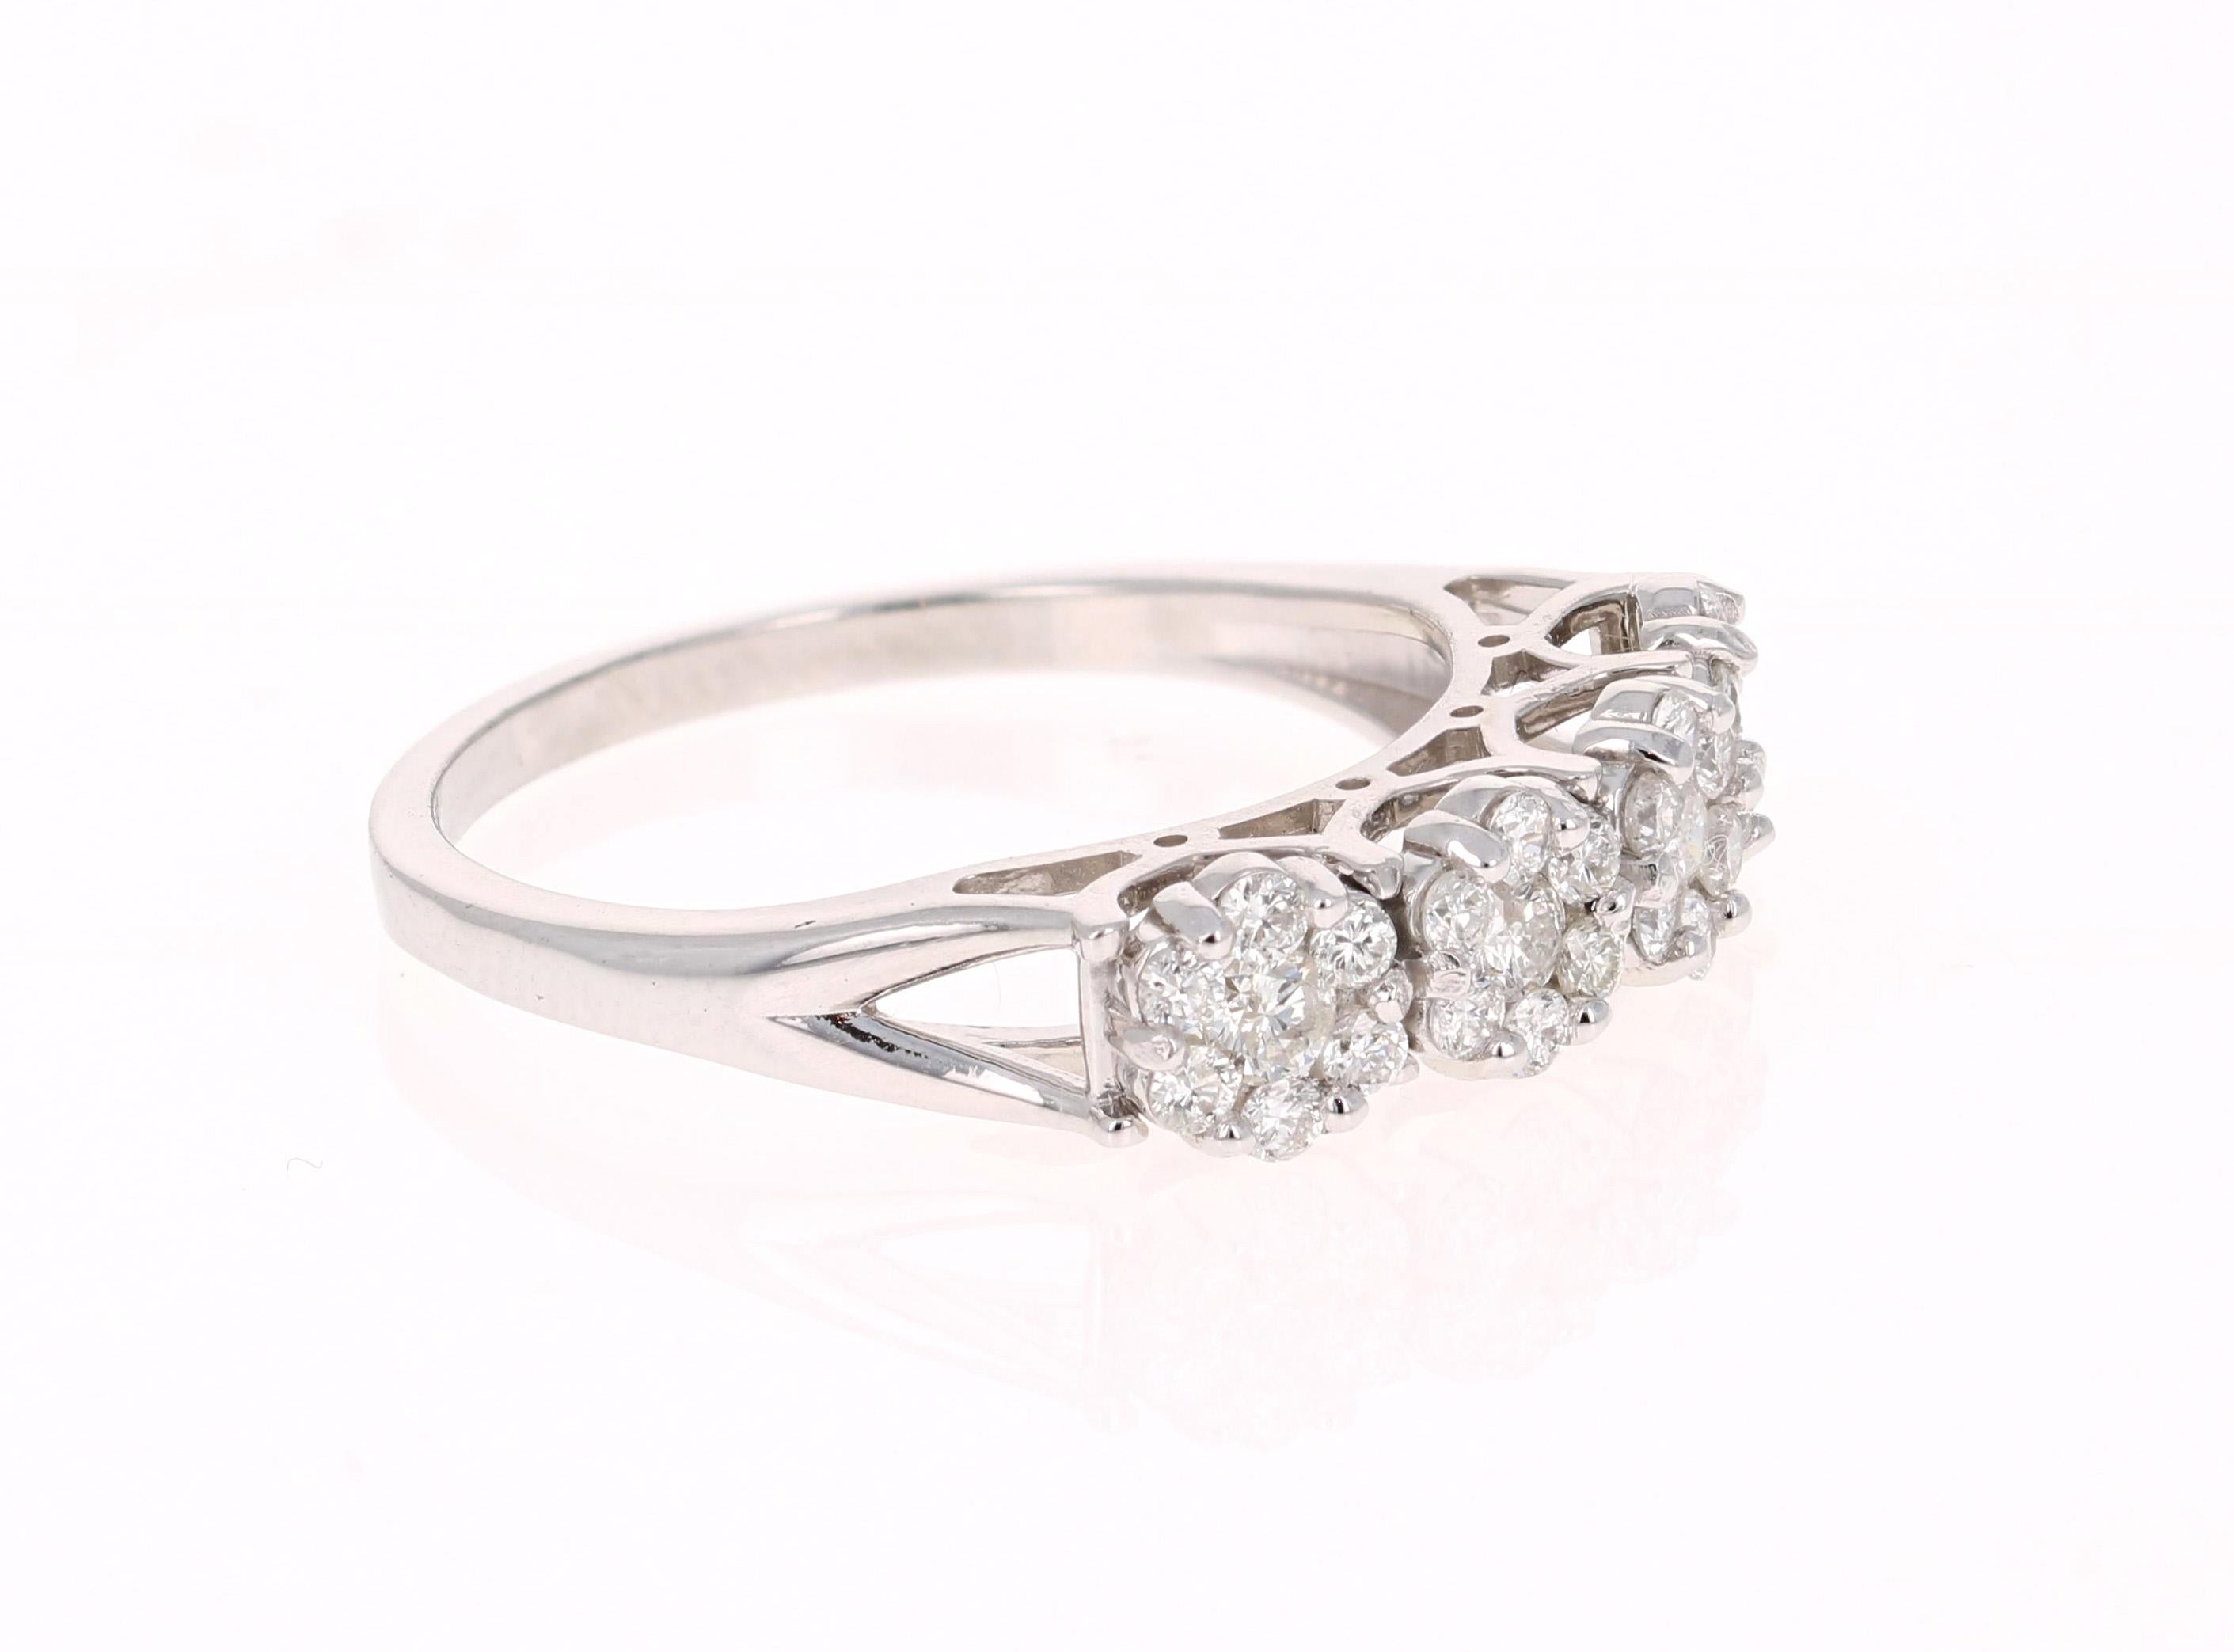 This ring has a flower design and has 28 Round Cut Diamonds that weighs 0.53 Carats. 

It is beautifully set in 14 Karat White Gold and weighs approximately 2.6 grams

The ring is a size 6 3/4 and can be re-sized free of charge. 

